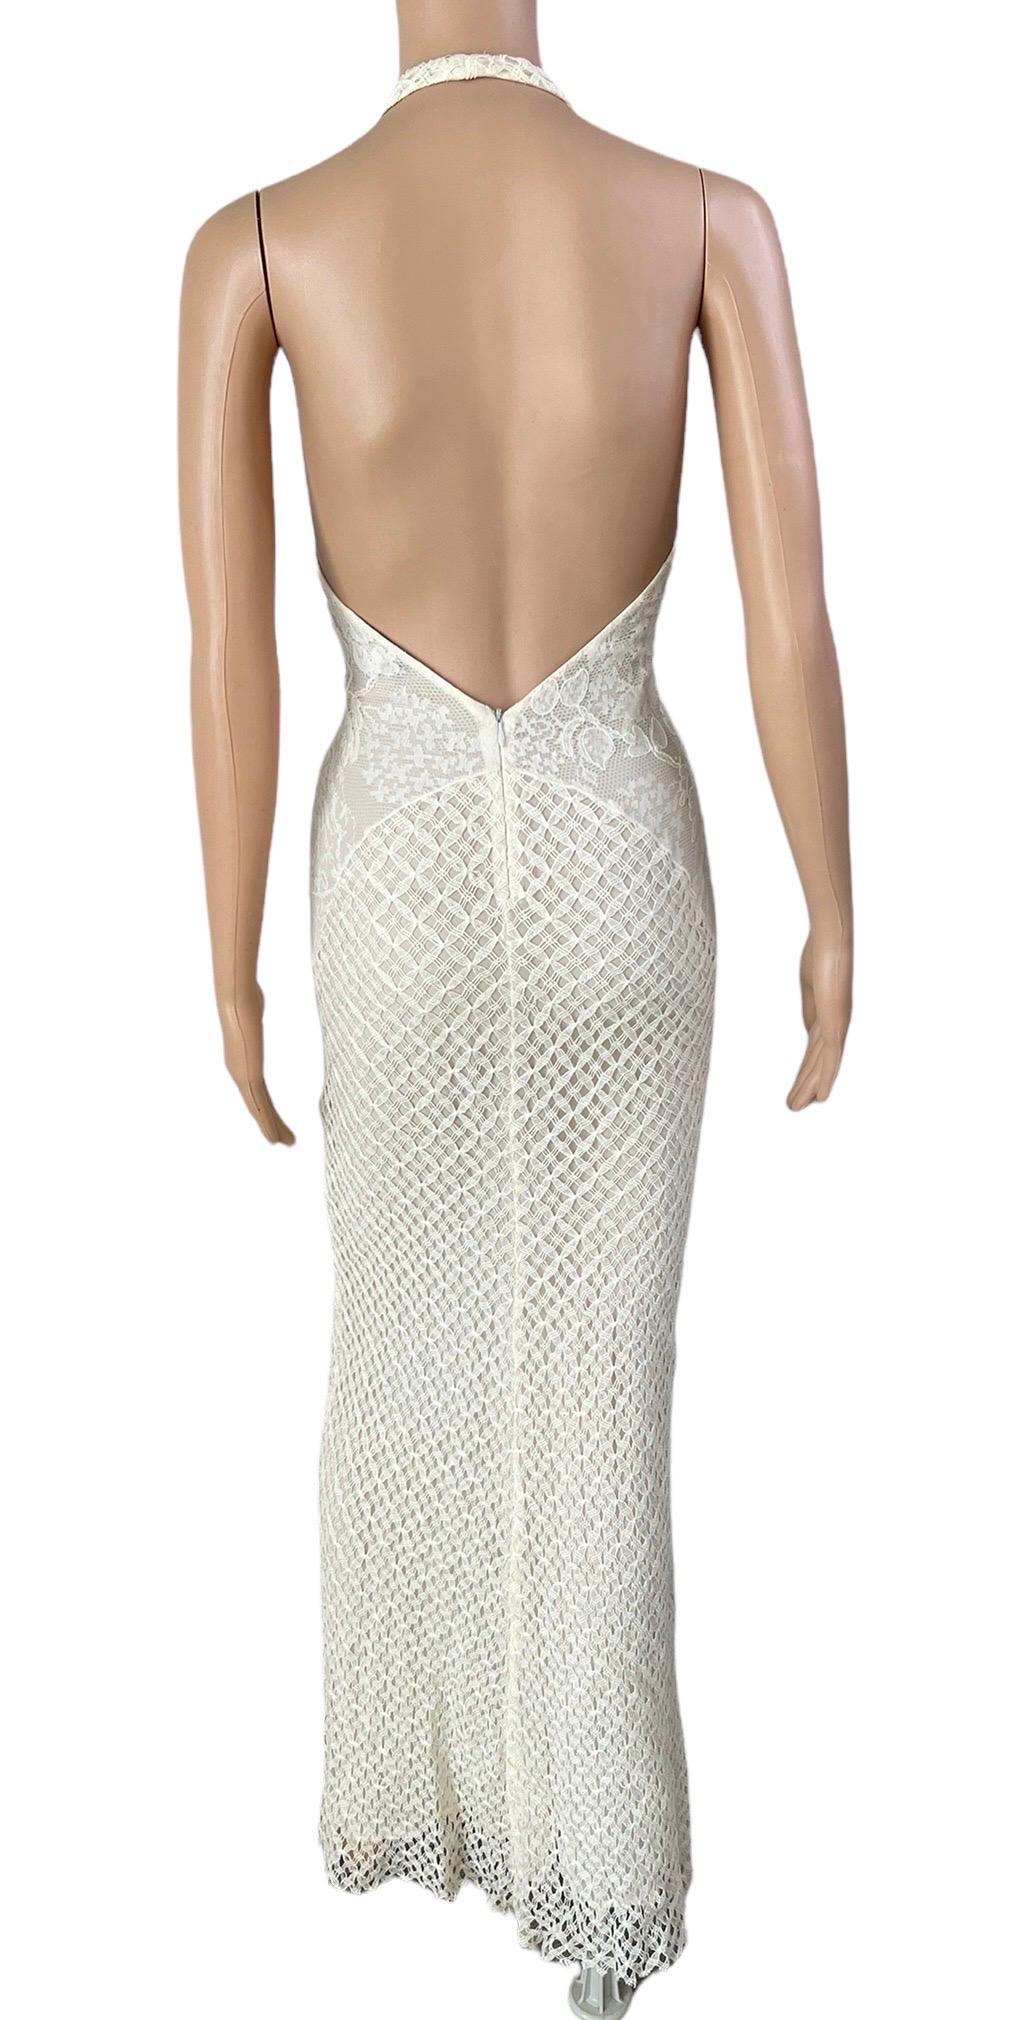 Gray Gianni Versace S/S 2002 Plunging Backless Semi Sheer Lace Knit Ivory Dress Gown